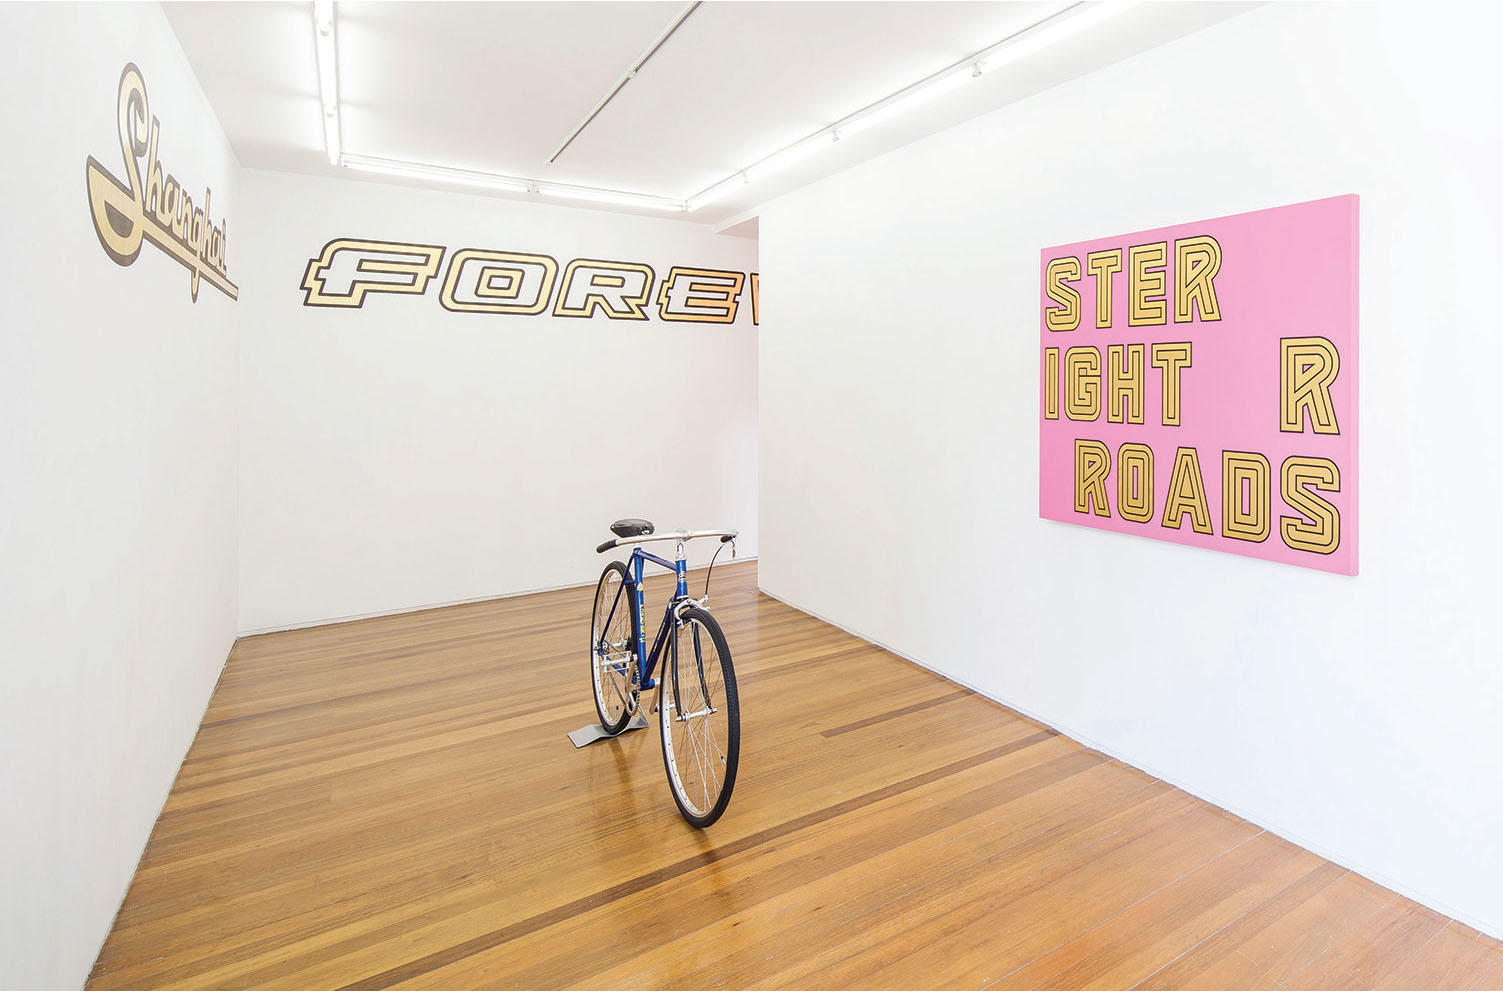 Left: Shanghai Forever, 2016, gold leaf and paint on wall, each character 43 x 64 cm Center: Huashan Road, 2016, artist-reassembled Forever bicycle, 94 x 175 x 46 cm Right: Untitled, 2016, acrylic and gold leaf on canvas, 102 x 150 cm Courtesy Leo Xu Projects PHOTO: JJY Photo